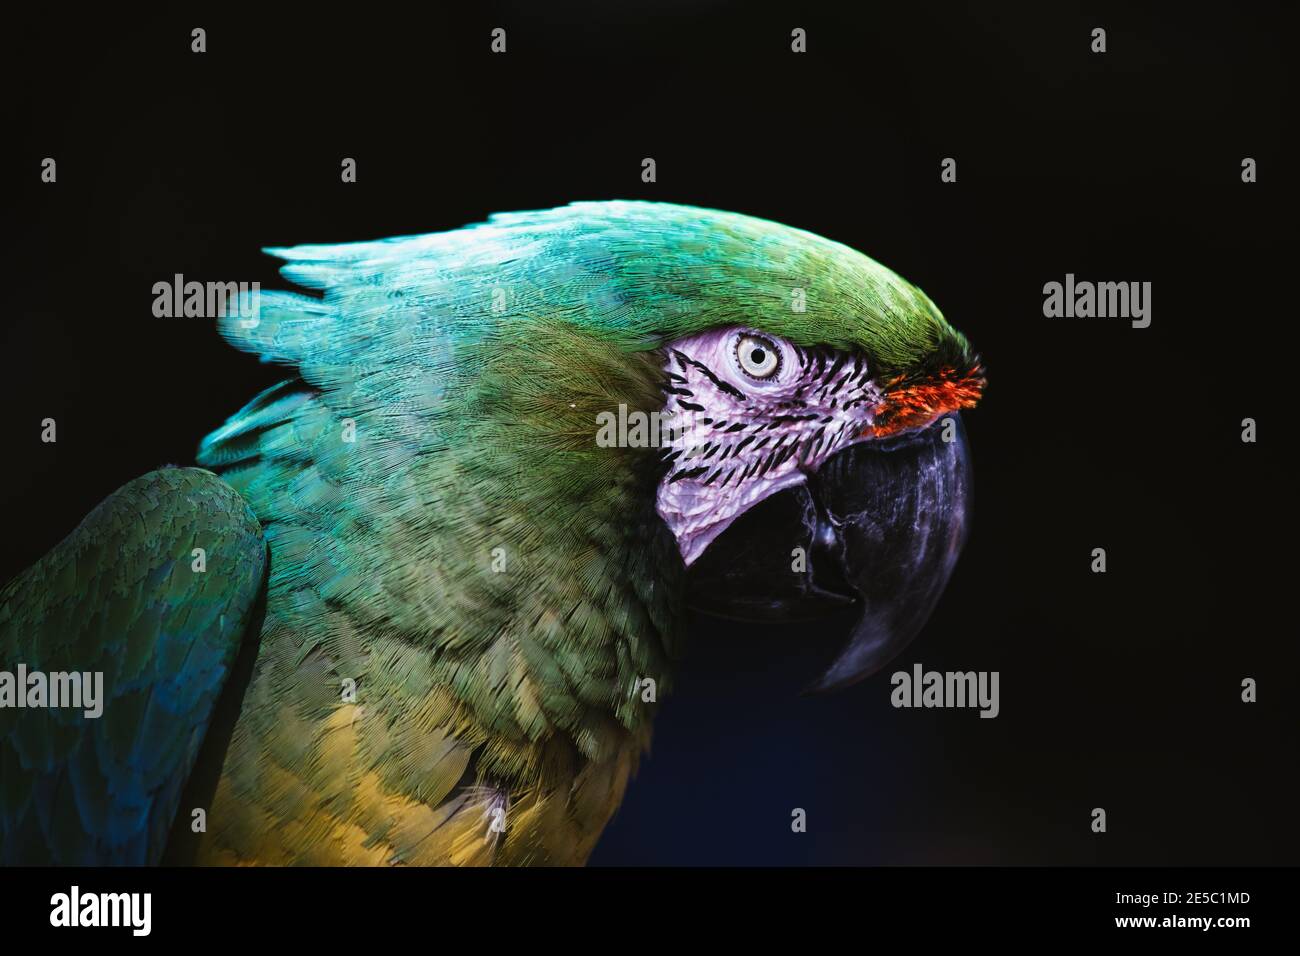 Green macaw exotic parrot without feathers, sick amazon rainforest bird Stock Photo